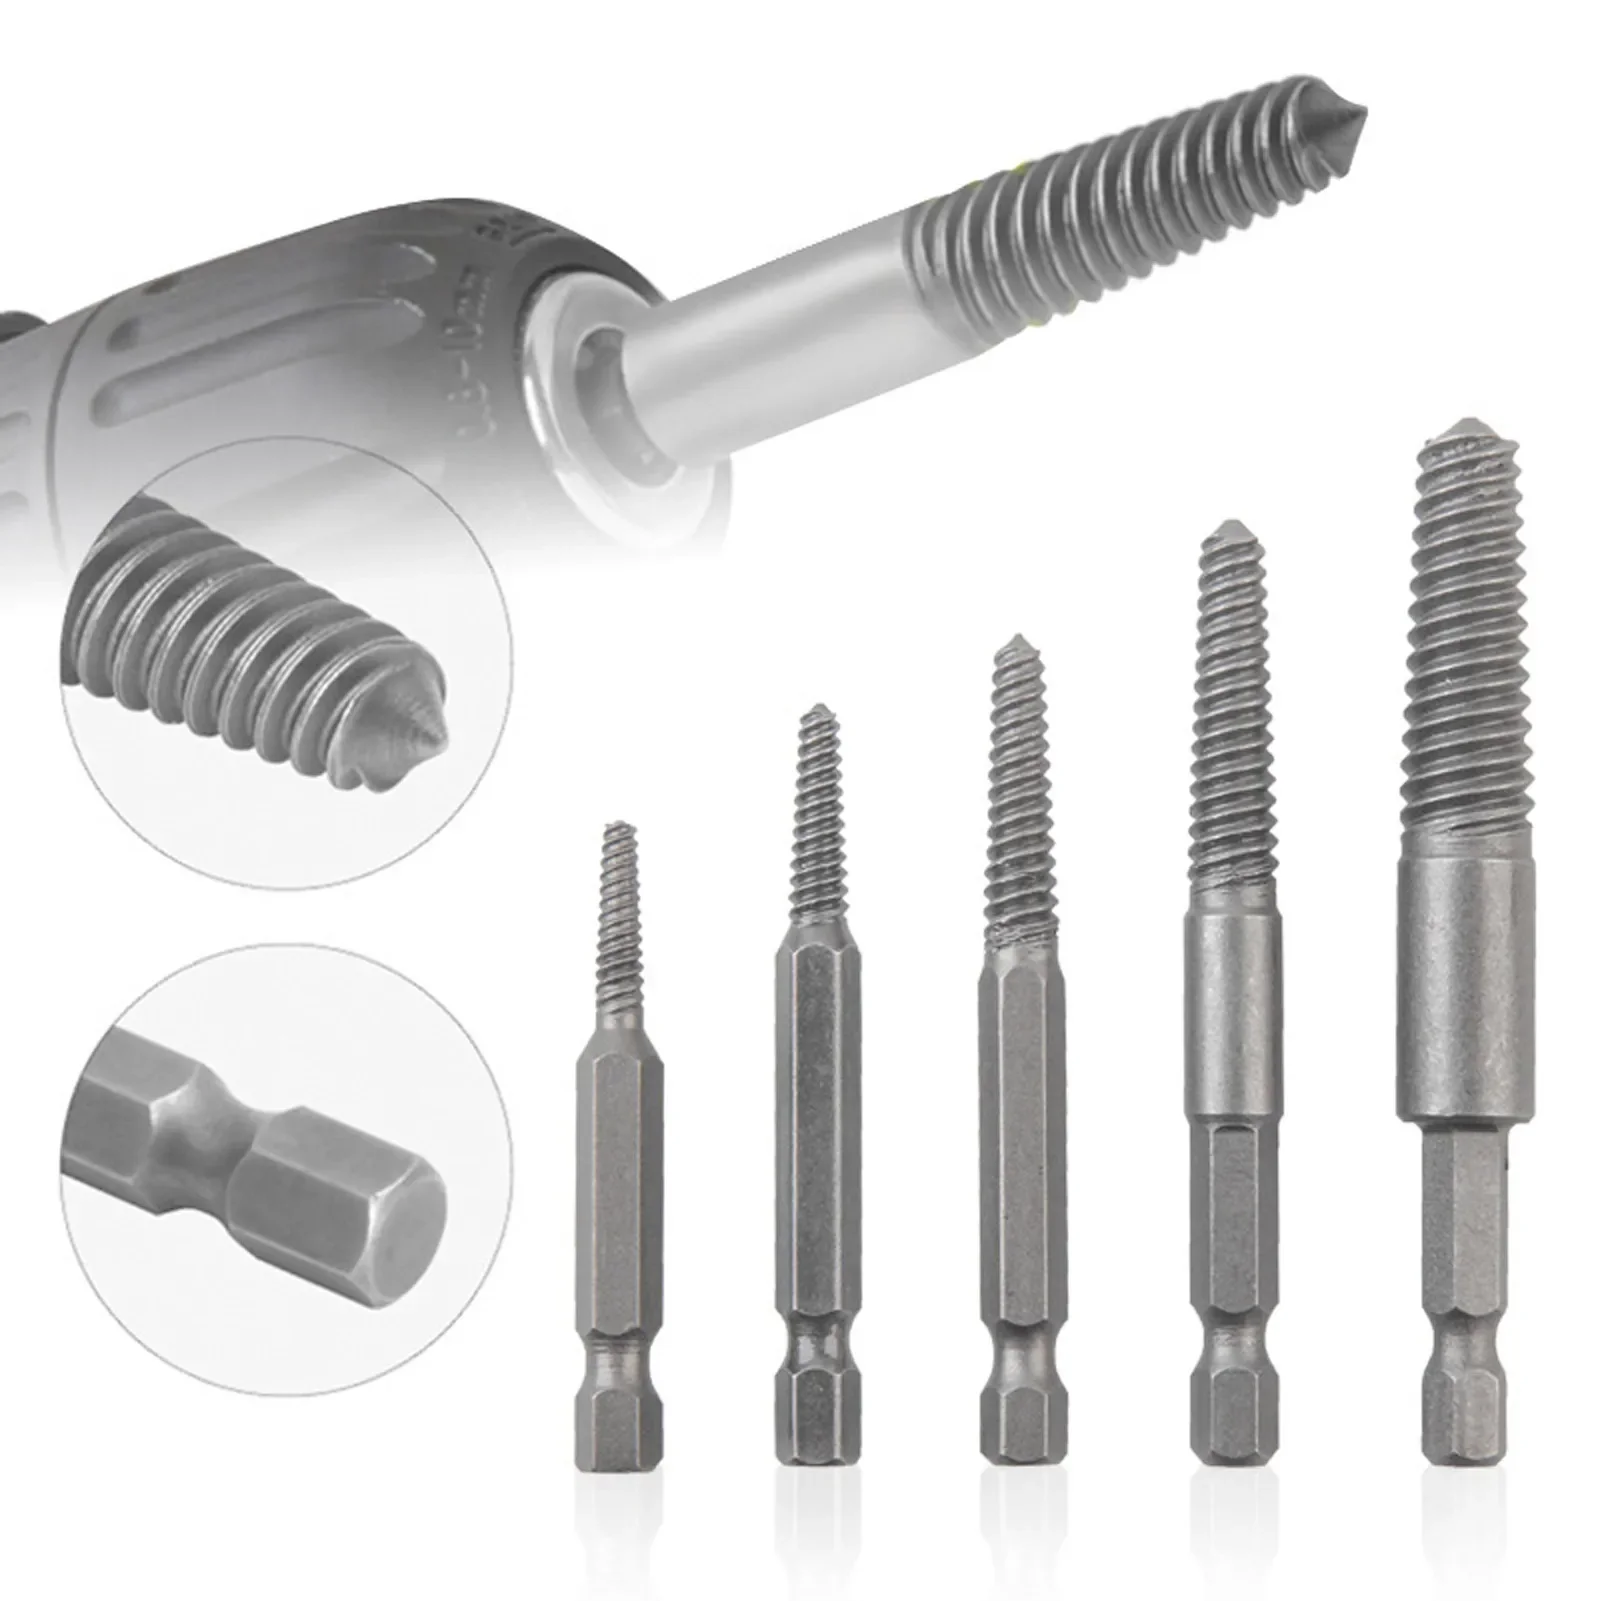 

Extractor Screw Set 6Pcs Kit Extractor Screw Damaged Tool Remover Screw Stripped Sets Remover Bolt Broken Set Bit Drill For Men